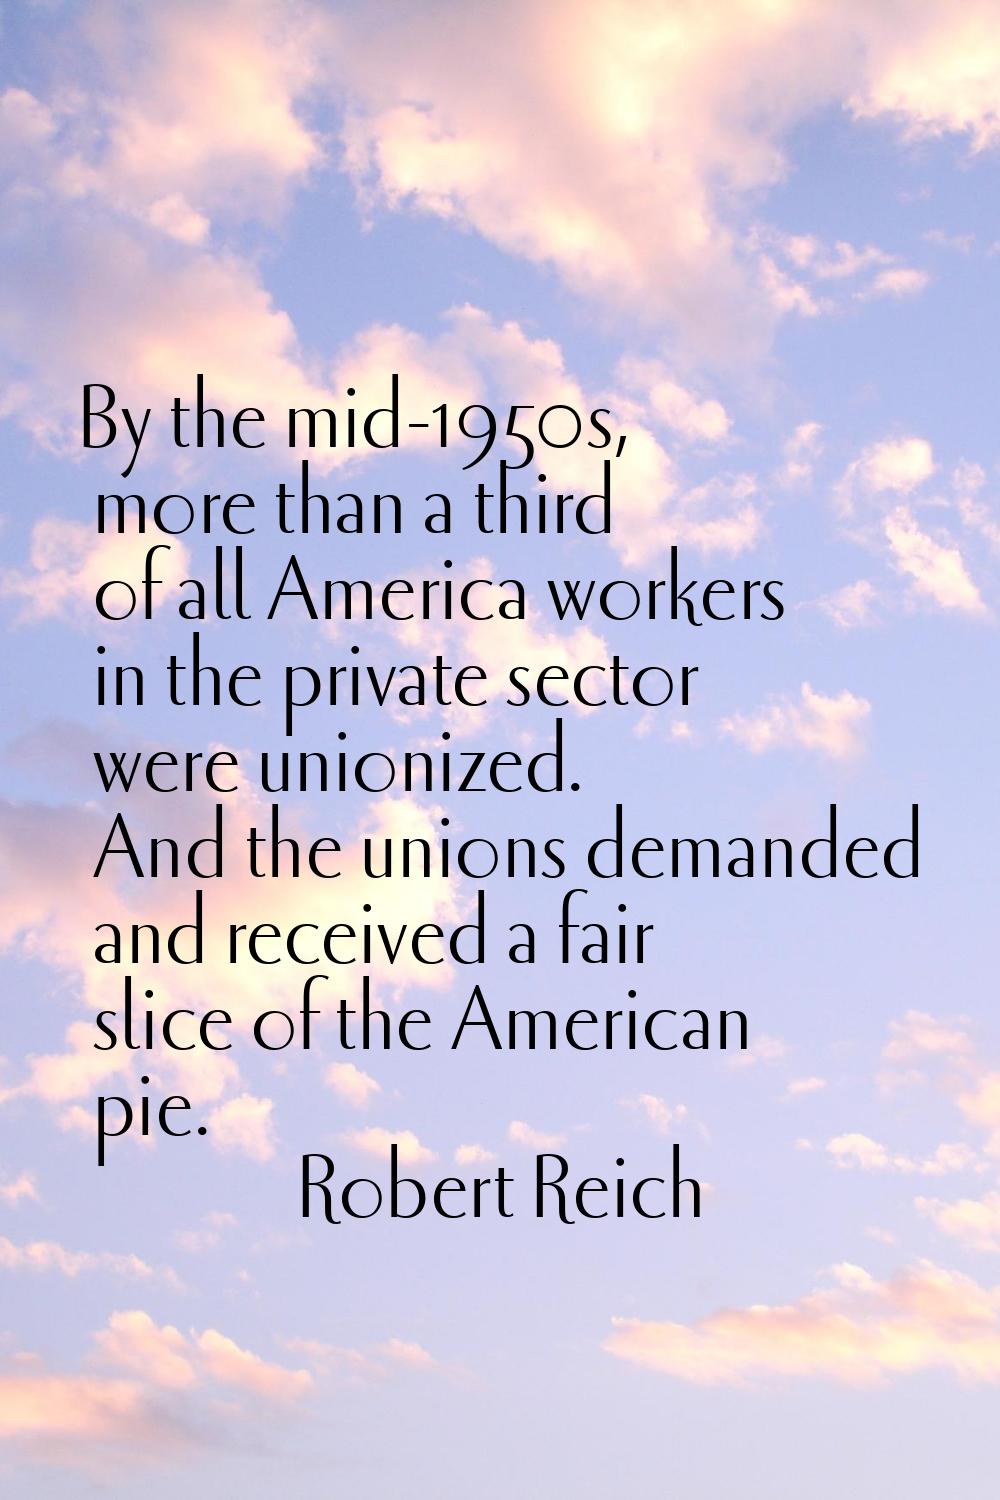 By the mid-1950s, more than a third of all America workers in the private sector were unionized. An